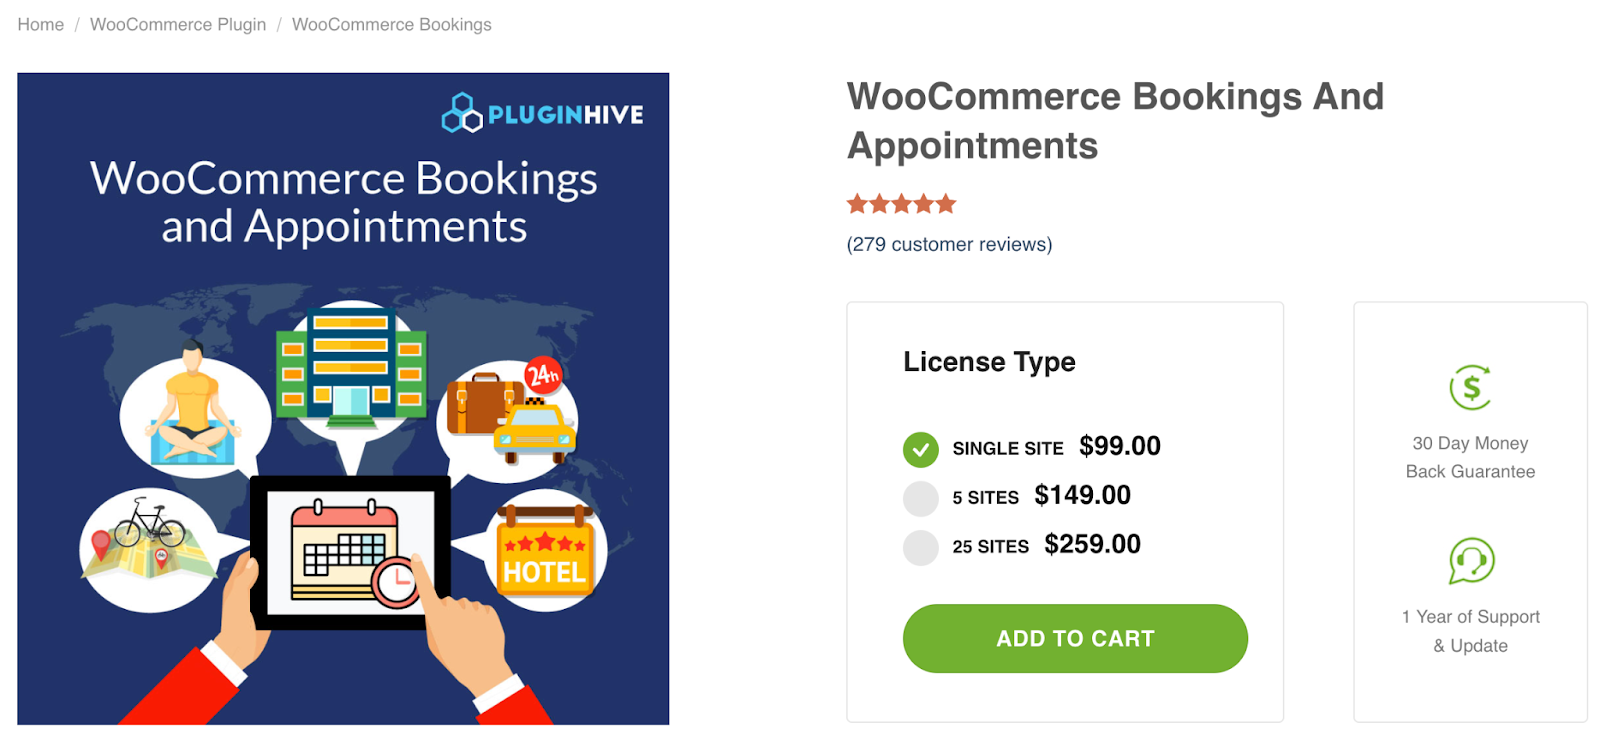 Plugin WooCommerce Bookings and Appointments